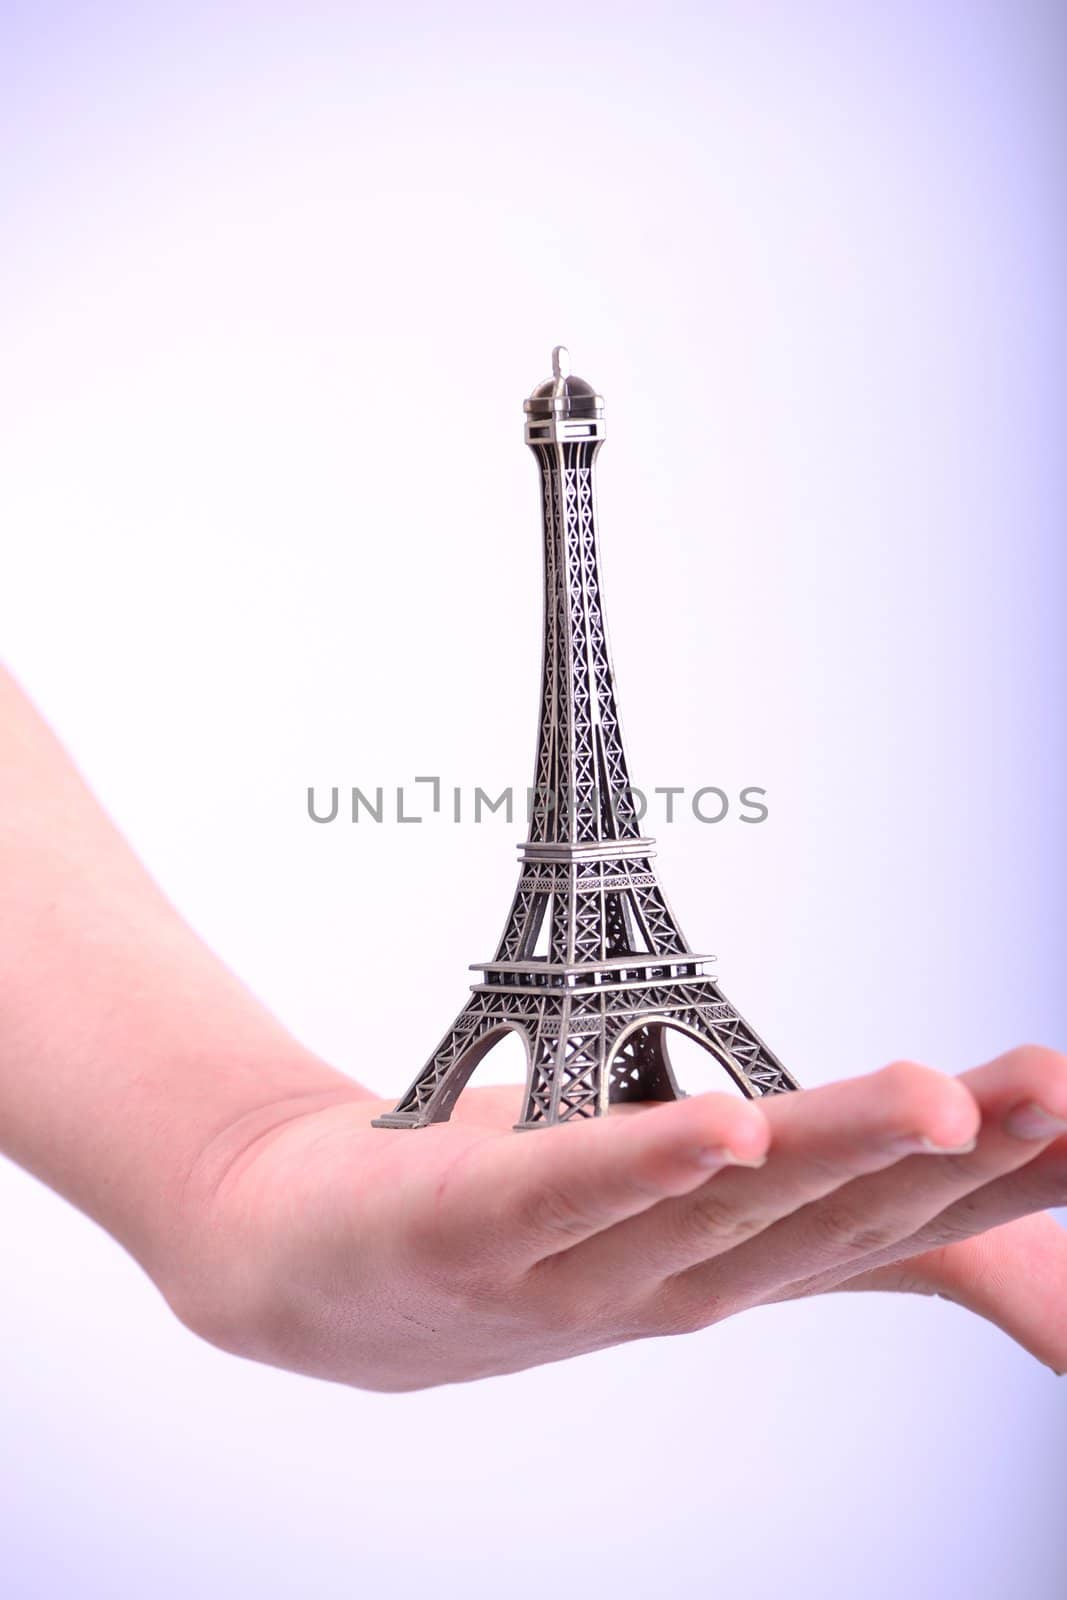 miniature Eiffel Tower is set to hand